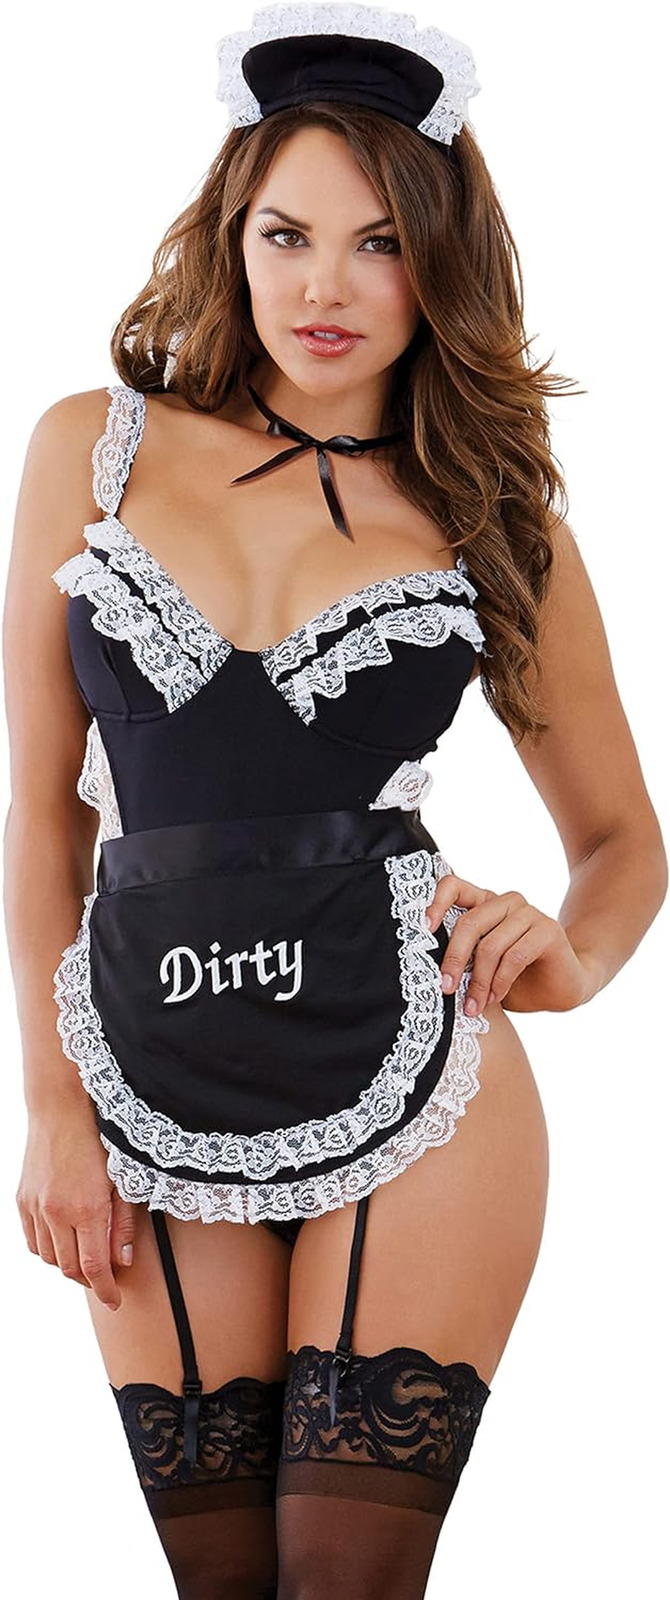 Womens French Maid-Themed and Apron Teddy, Black, One Size US